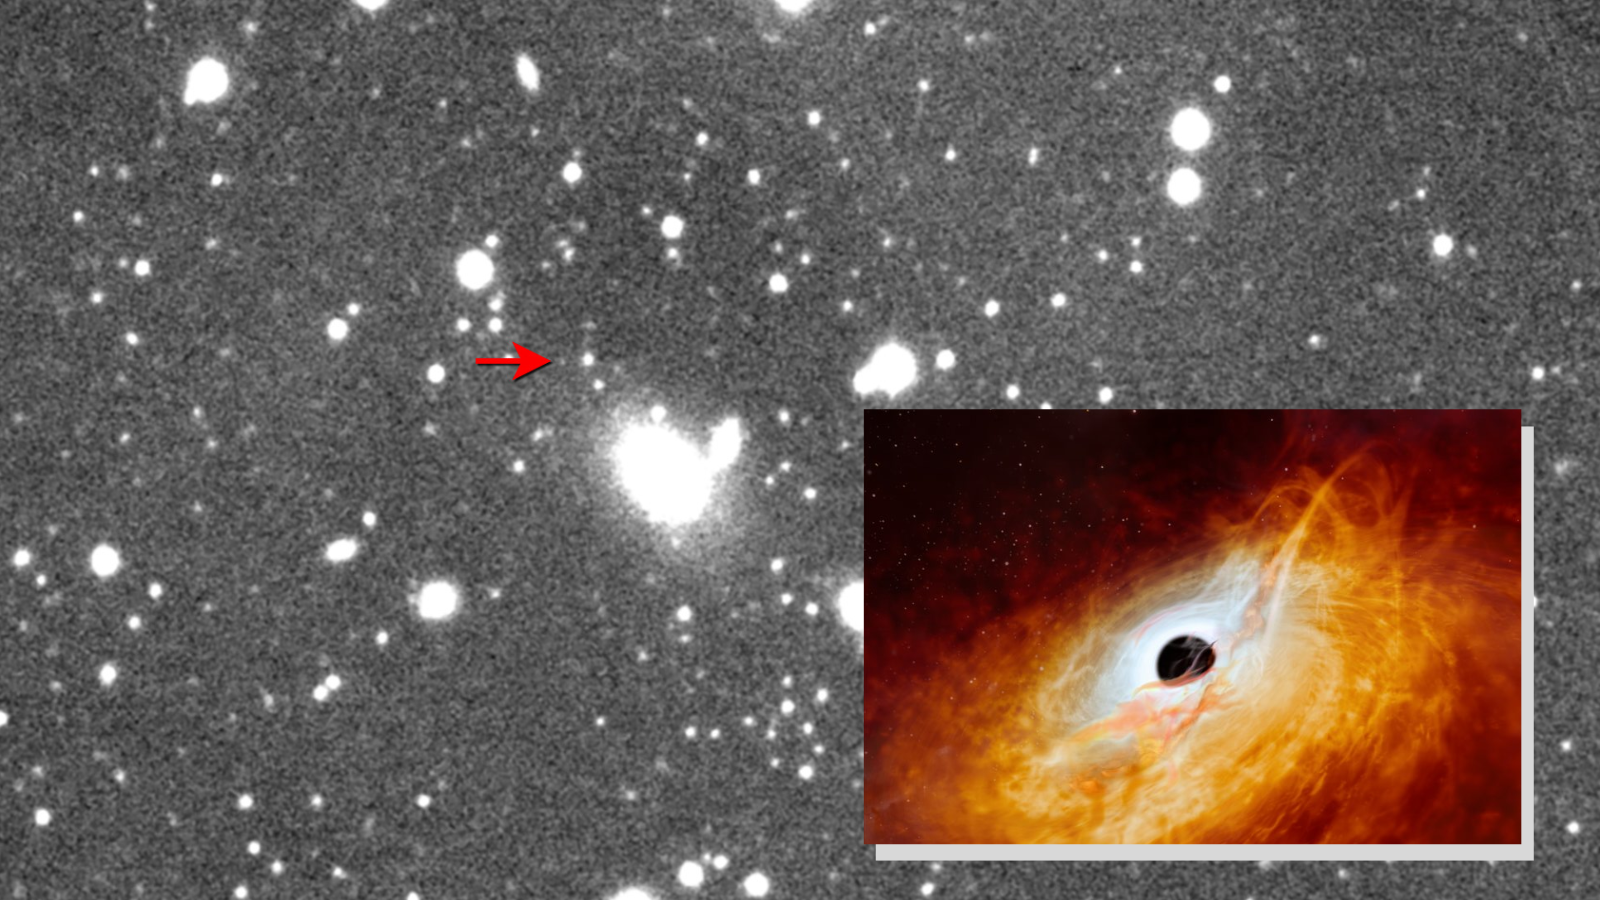 Monster black hole seen feeding on nearby matter just 1 billion years after Big Bang (photos)